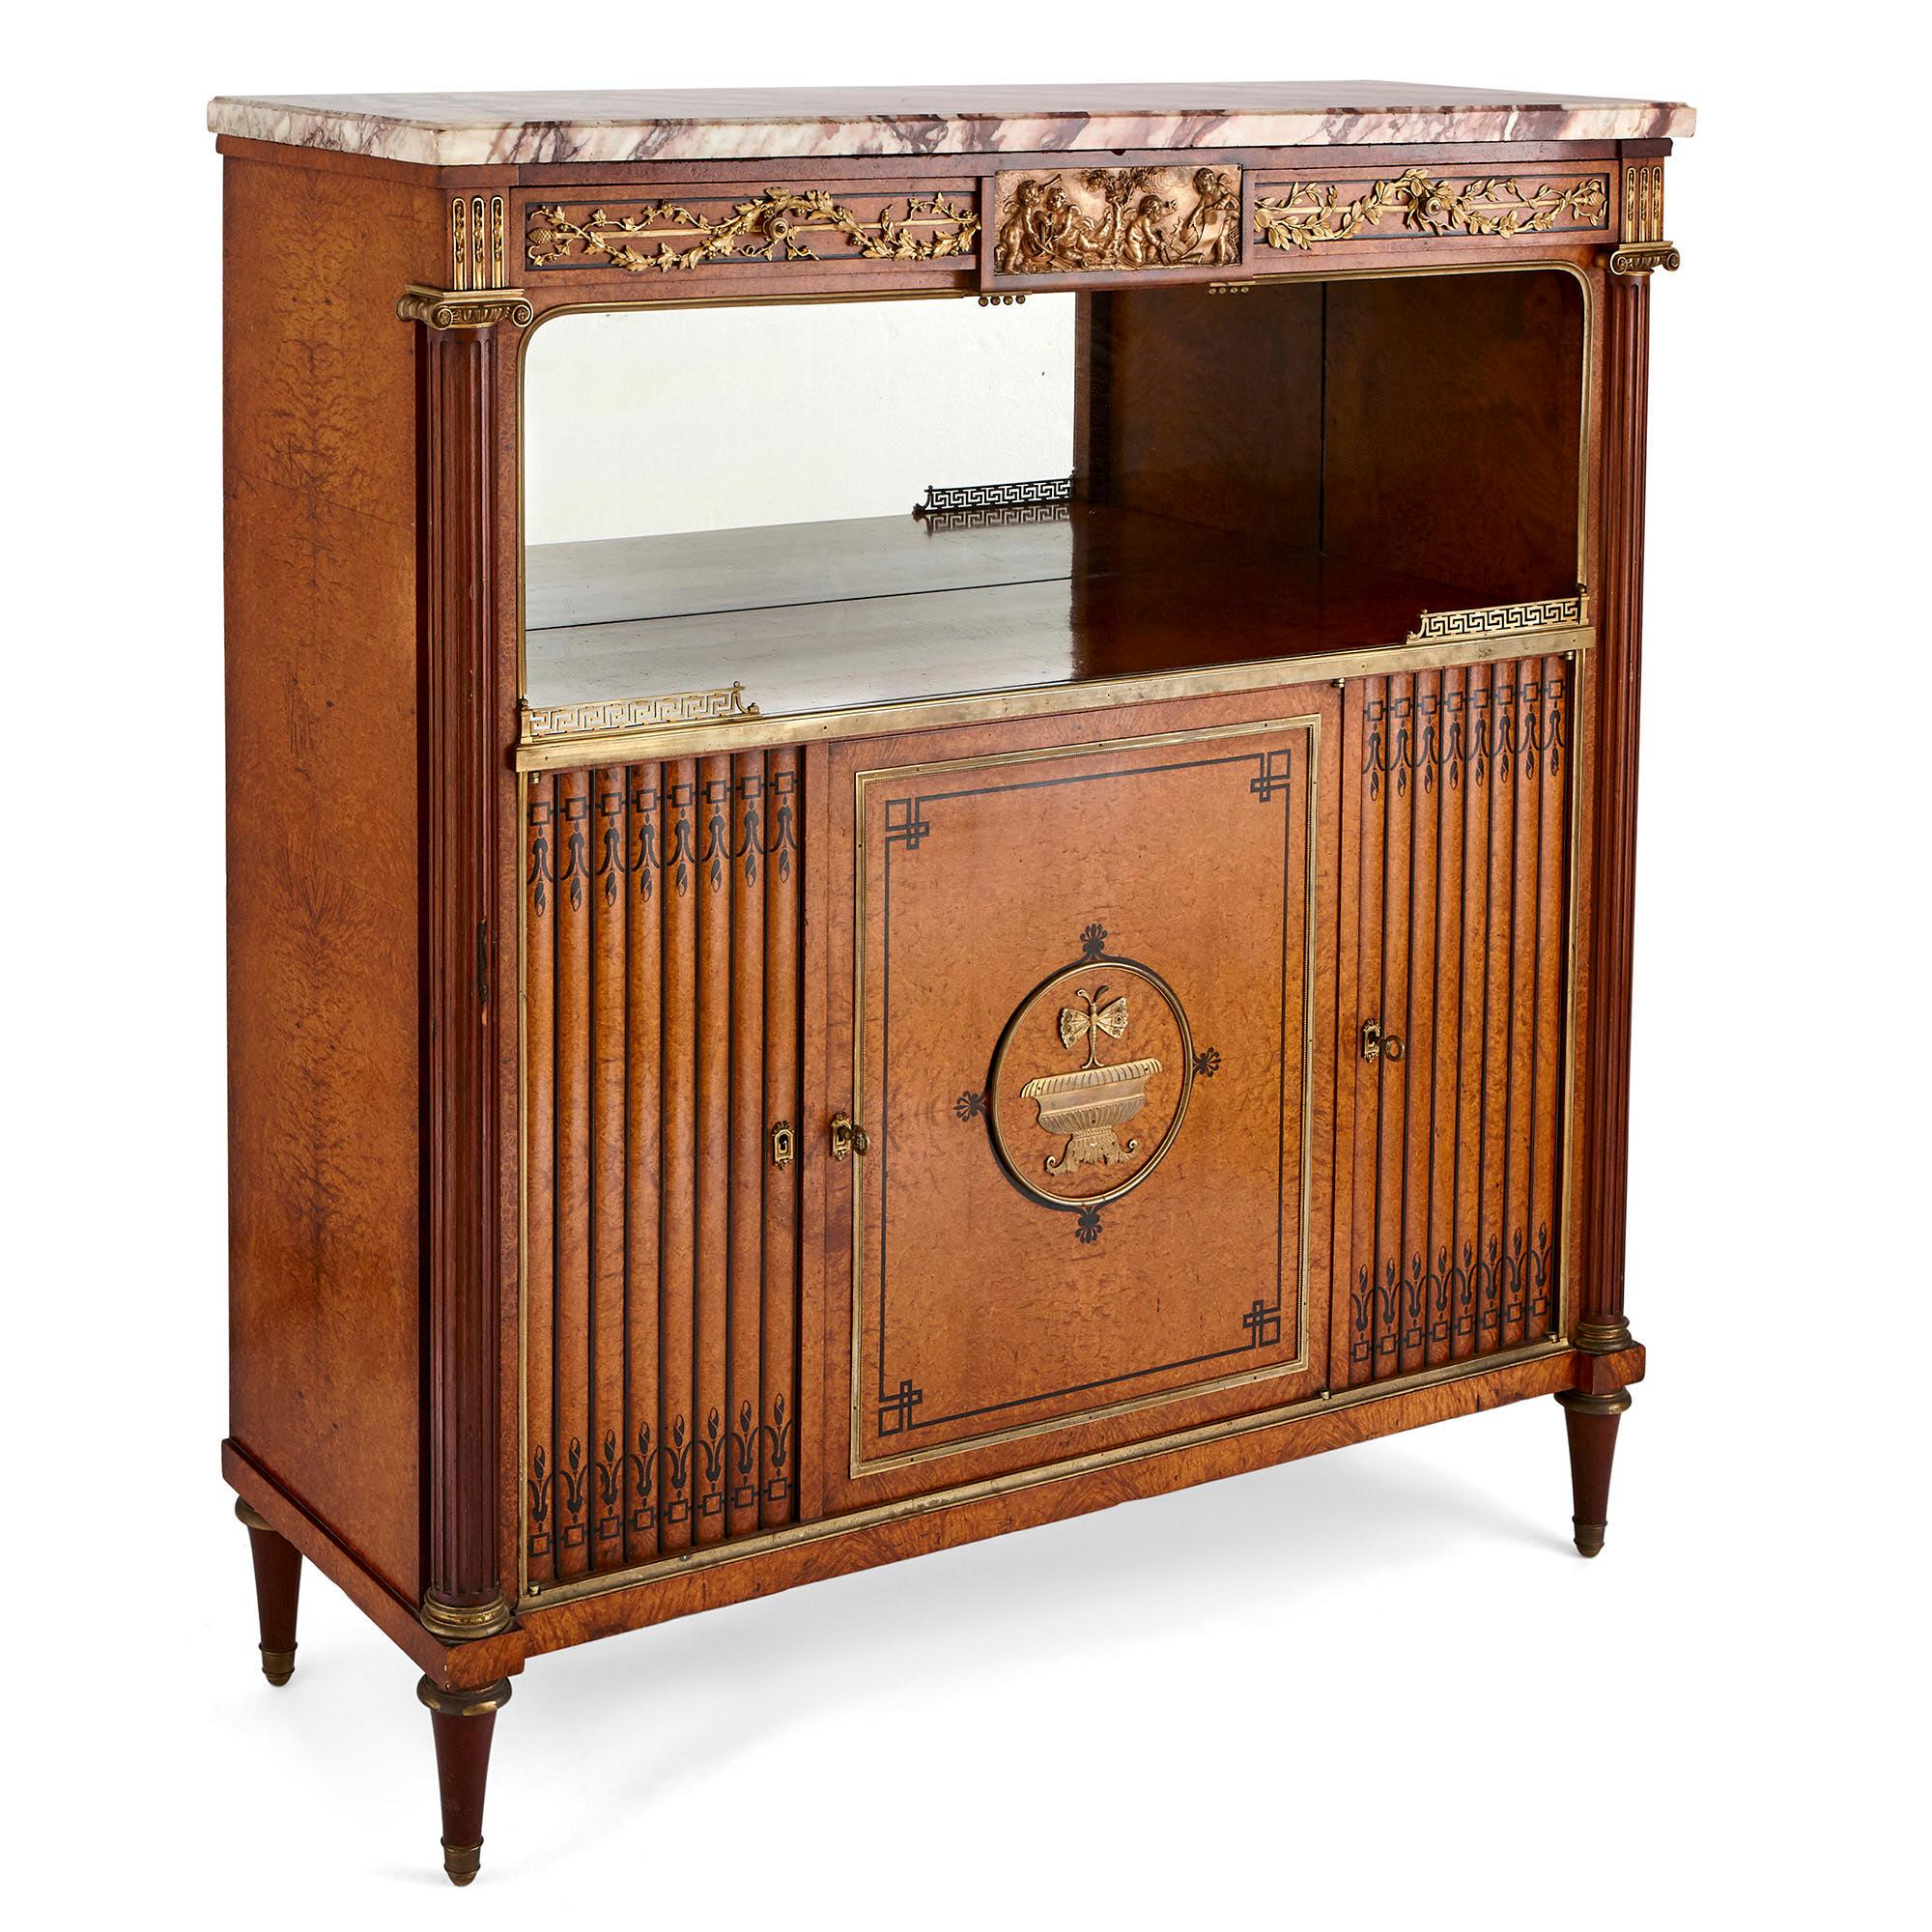 This wonderful side cabinet was created in France in the 19th century. The cabinet is crafted from amboyna burl wood, with inlaid ebony wood decoration and gilt bronze (ormolu) mounts.

The cabinet is covered by veined white marble. This tops a